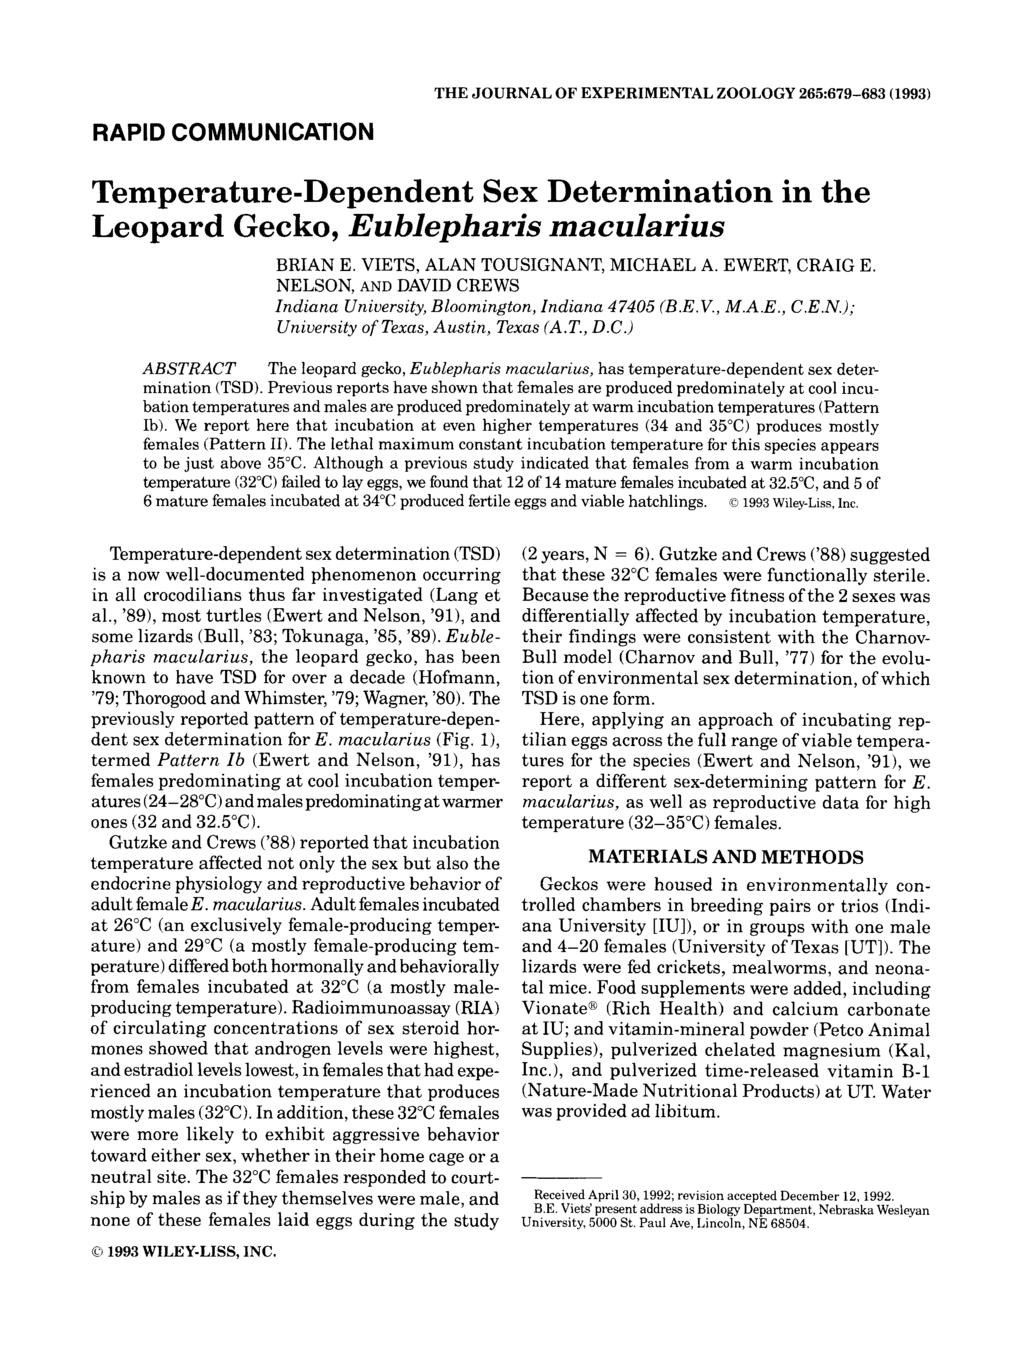 THE JOURNAL OF EXPERIMENTAL ZOOLOGY 265579-683 (1993) RAPID COMMUNICATION Temperature-Dependent Sex Determination in the Leopard Gecko, Eublepharis macularius BRIAN E.